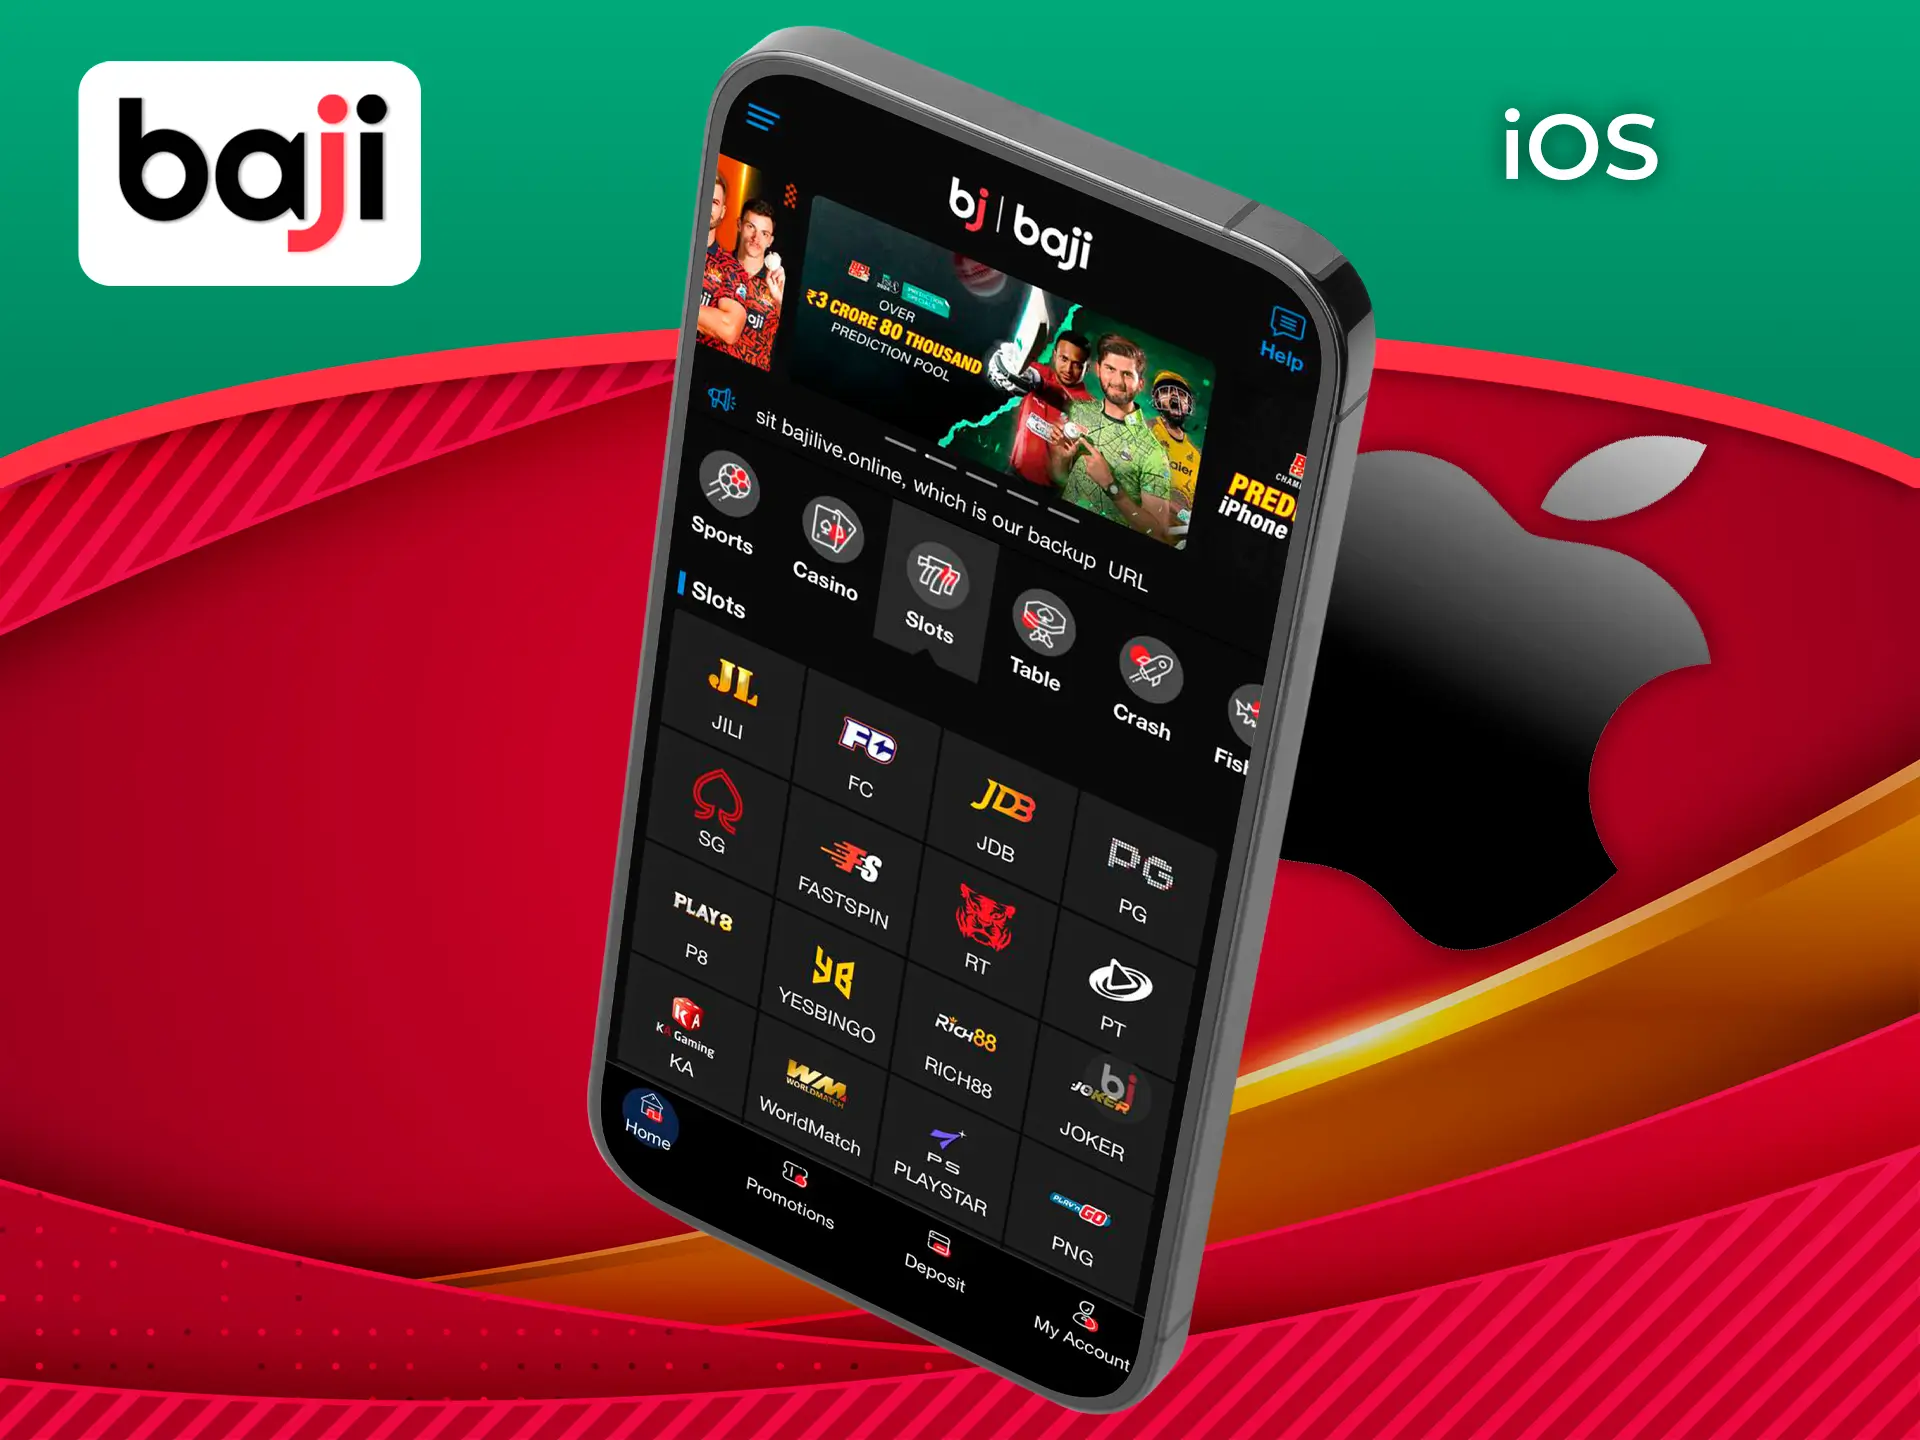 High speed performance and smooth interface, you get all of this in the Baji app for iOS.